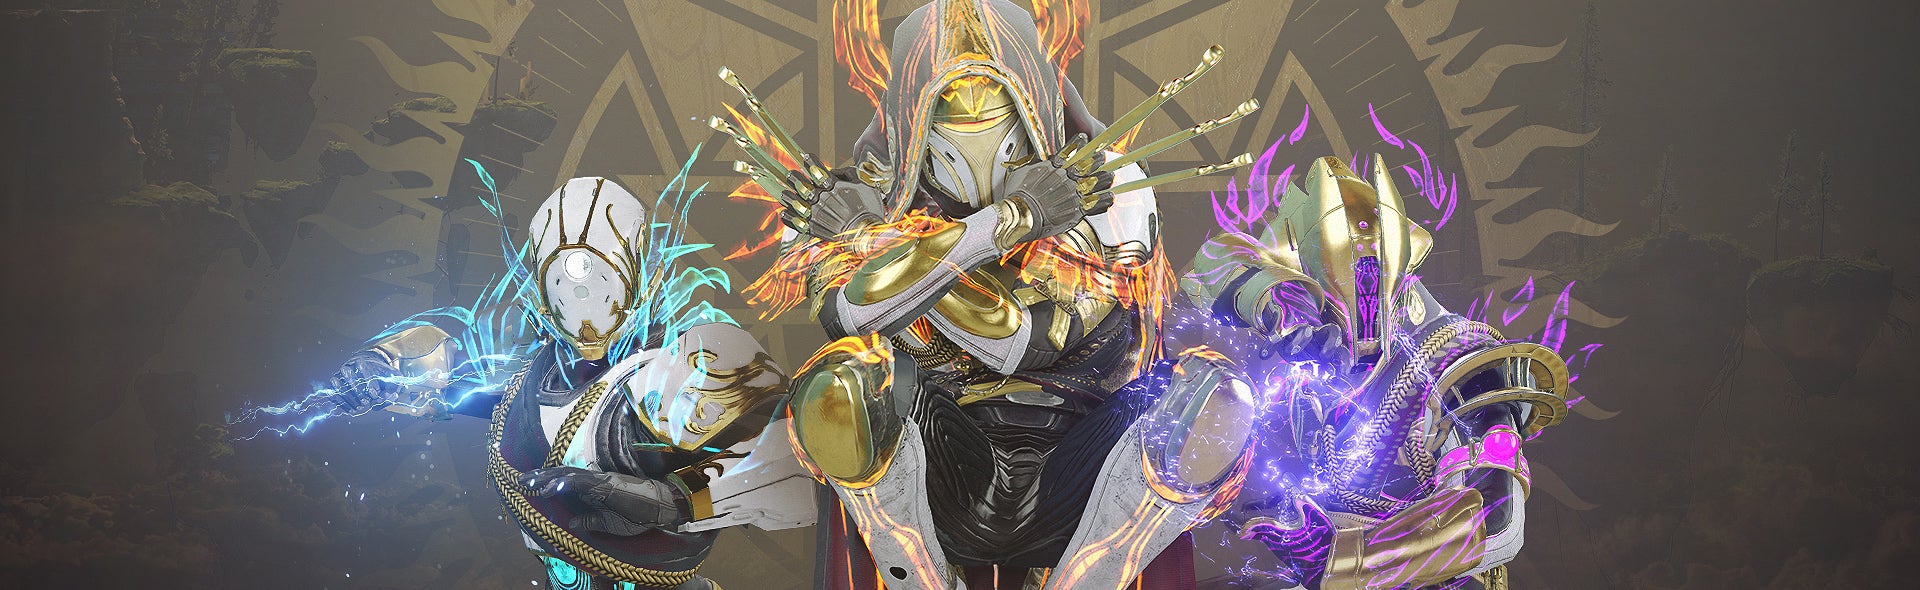 Image for Destiny 2: Solstice of Heroes returns with a new event zone, elemental buffs, and rewards